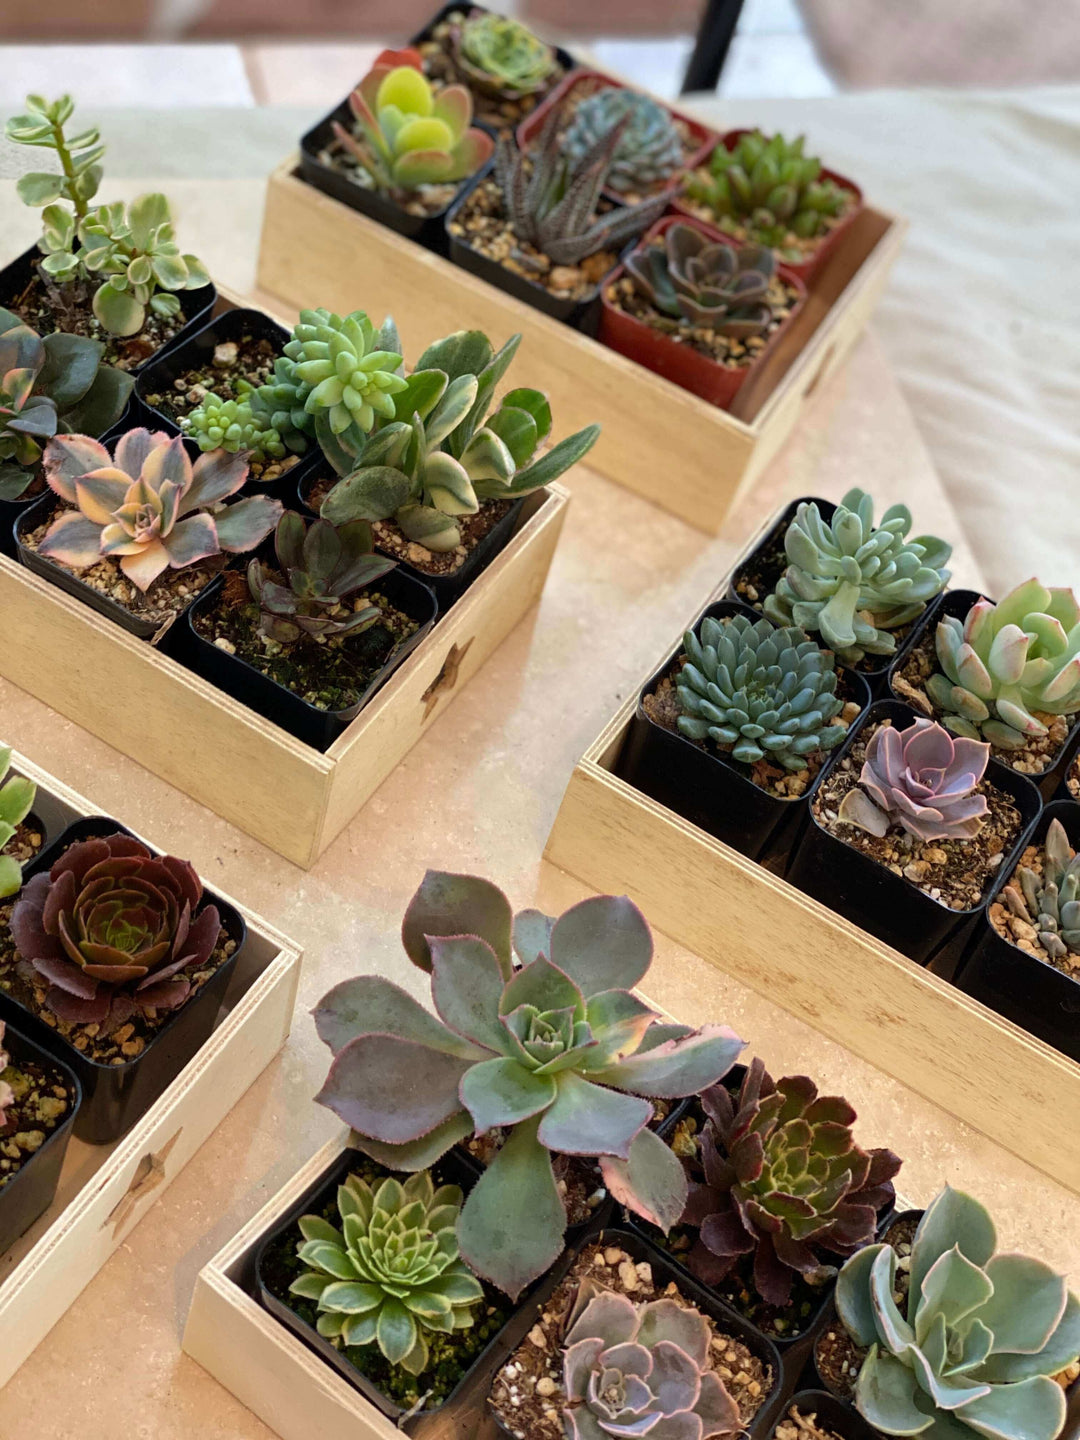 Decorative 6-pack of 2-inch succulents, each demonstrating unique adaptations and colorful foliage.